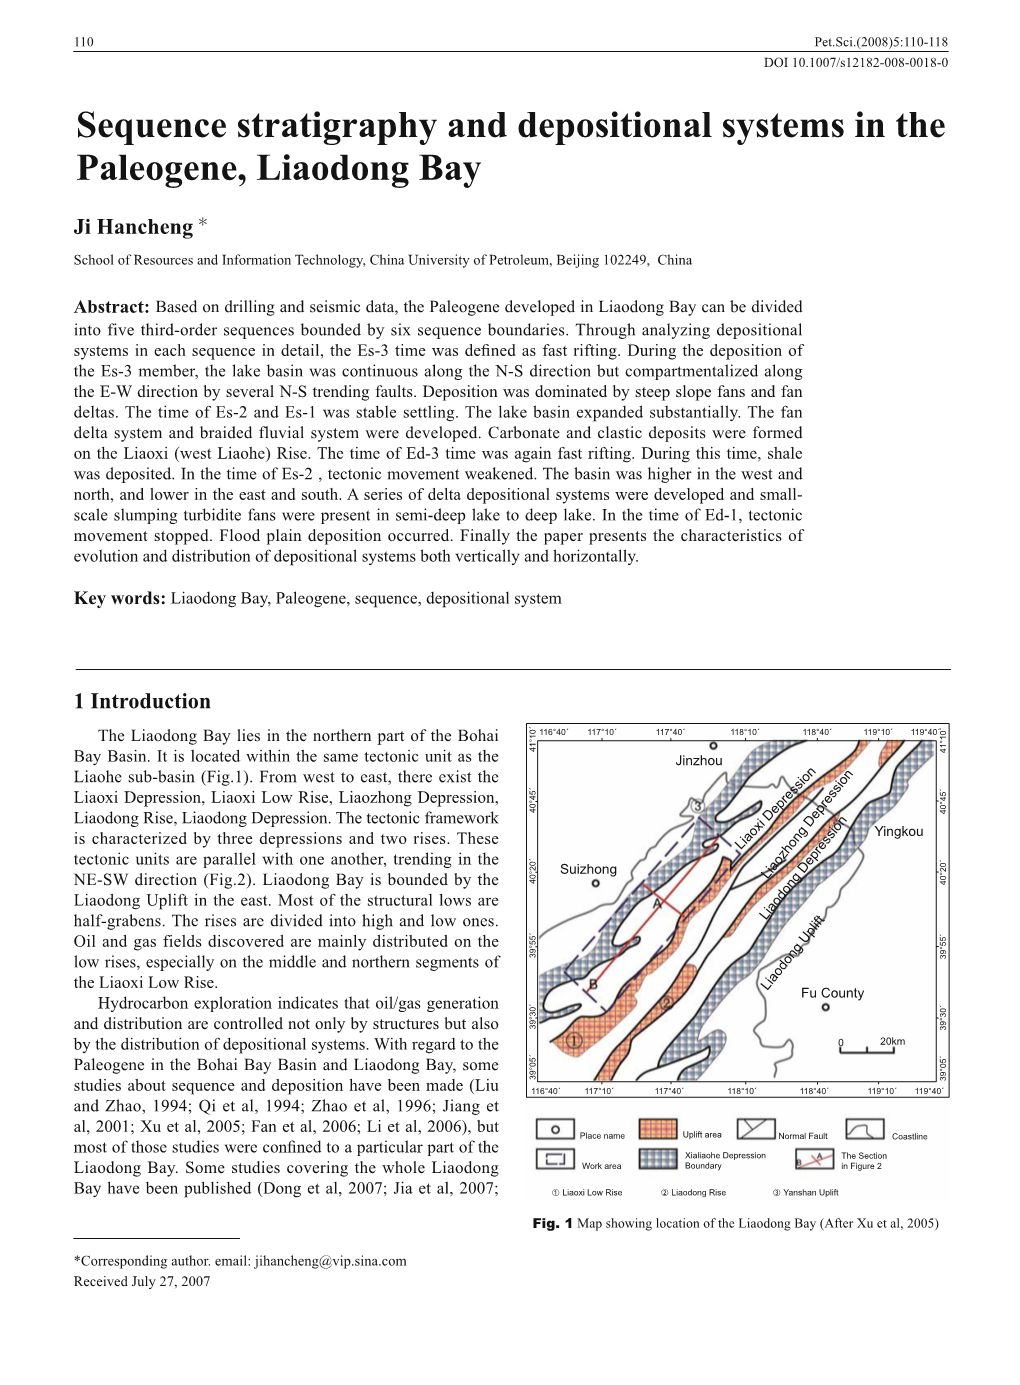 Sequence Stratigraphy and Depositional Systems in the Paleogene, Liaodong Bay